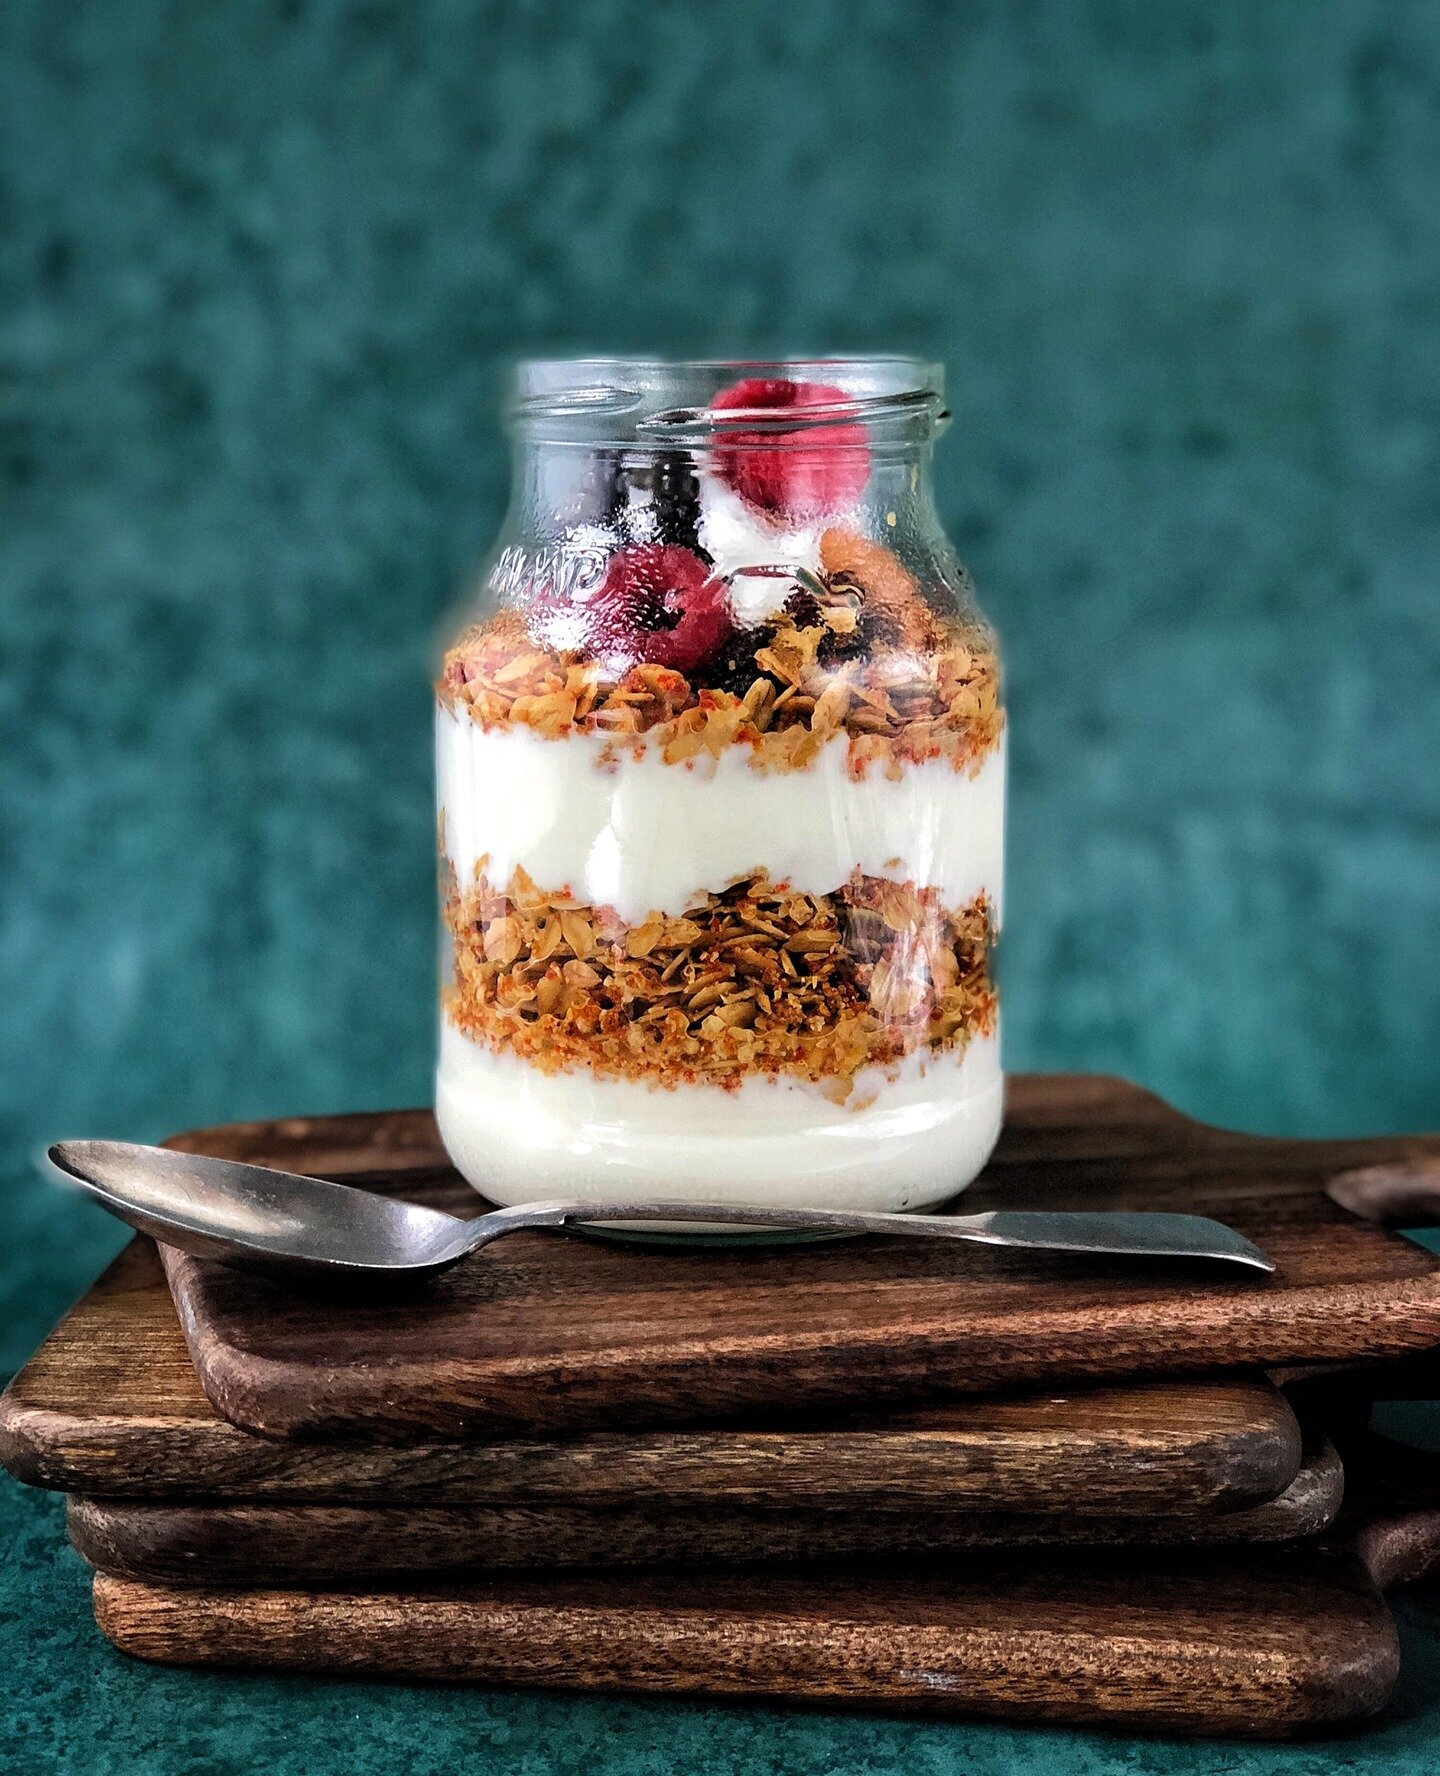 How do you eat your granola? ⁠
⁠
We like ours layered with @thedorsetdairyco greek yoghurt and topped with fresh berries! ⁠
⁠
#Risebakestore #Risemarketandbakery #Risebakes #Janesgrains #Granola #yoghurt  #breakfast #glutenfree #healthy #foodie #orga